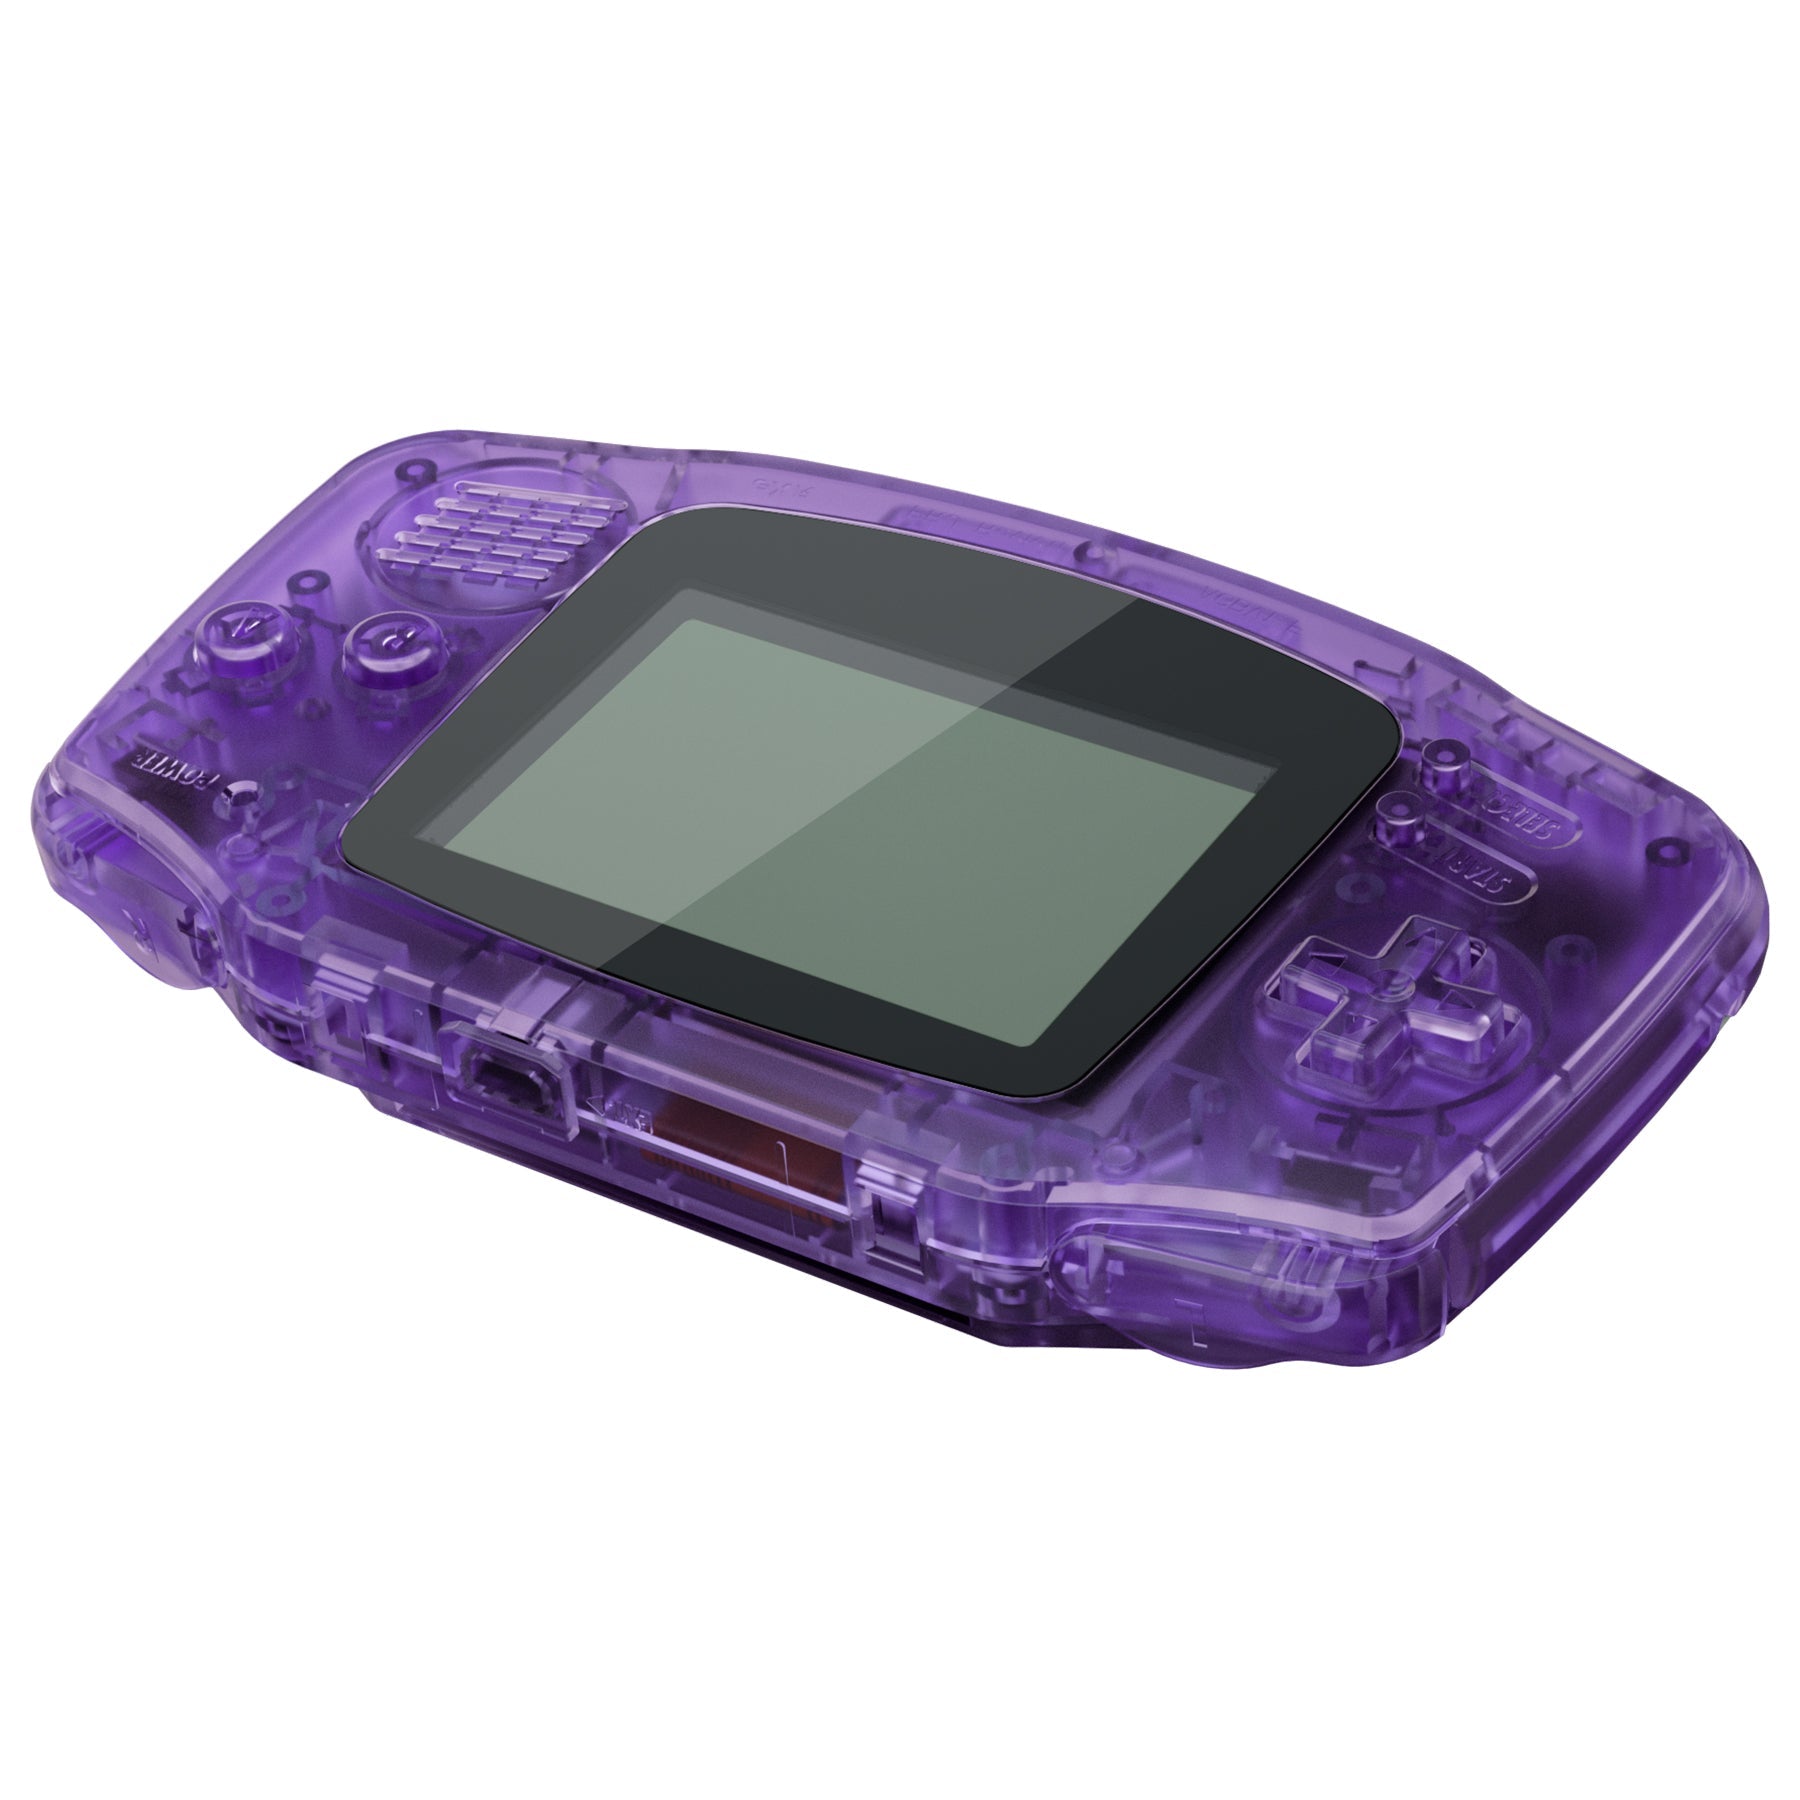 My GBA SP Joined the Atomic Purple Club! :) : r/Gameboy